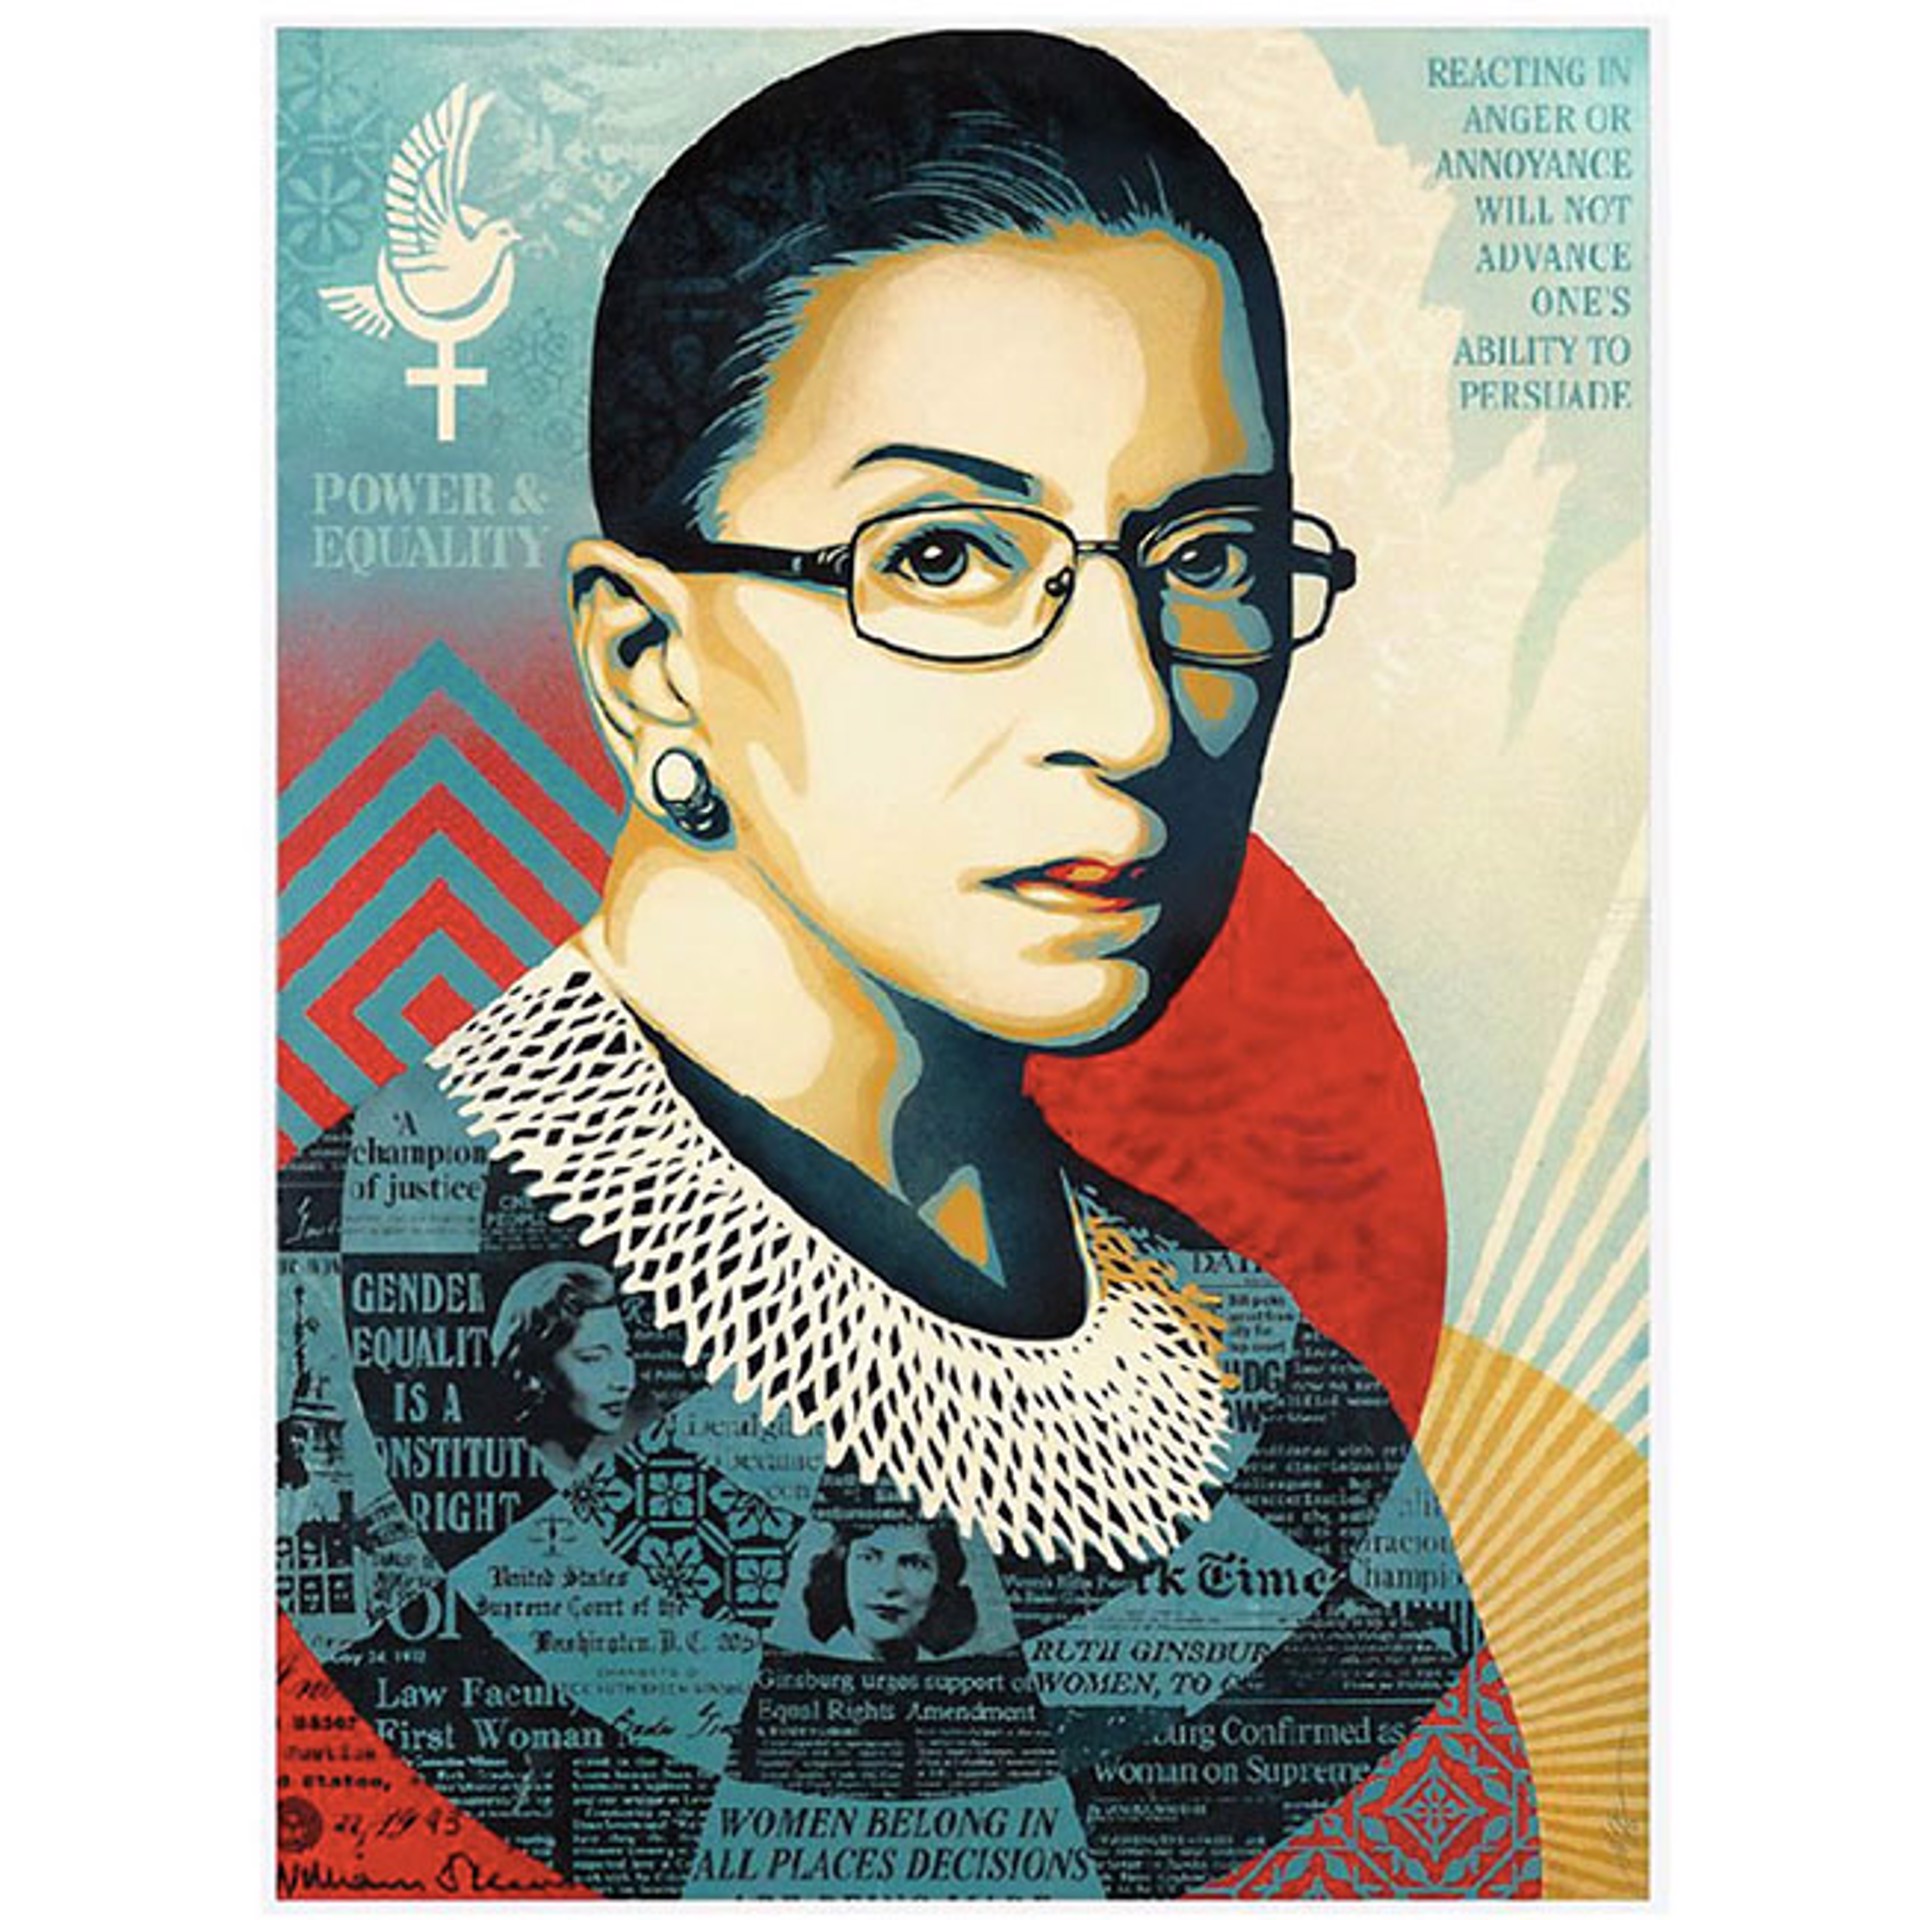 A Champion of Justice (Ruth Bader Ginsburg) Version 2 by Shepard Fairey